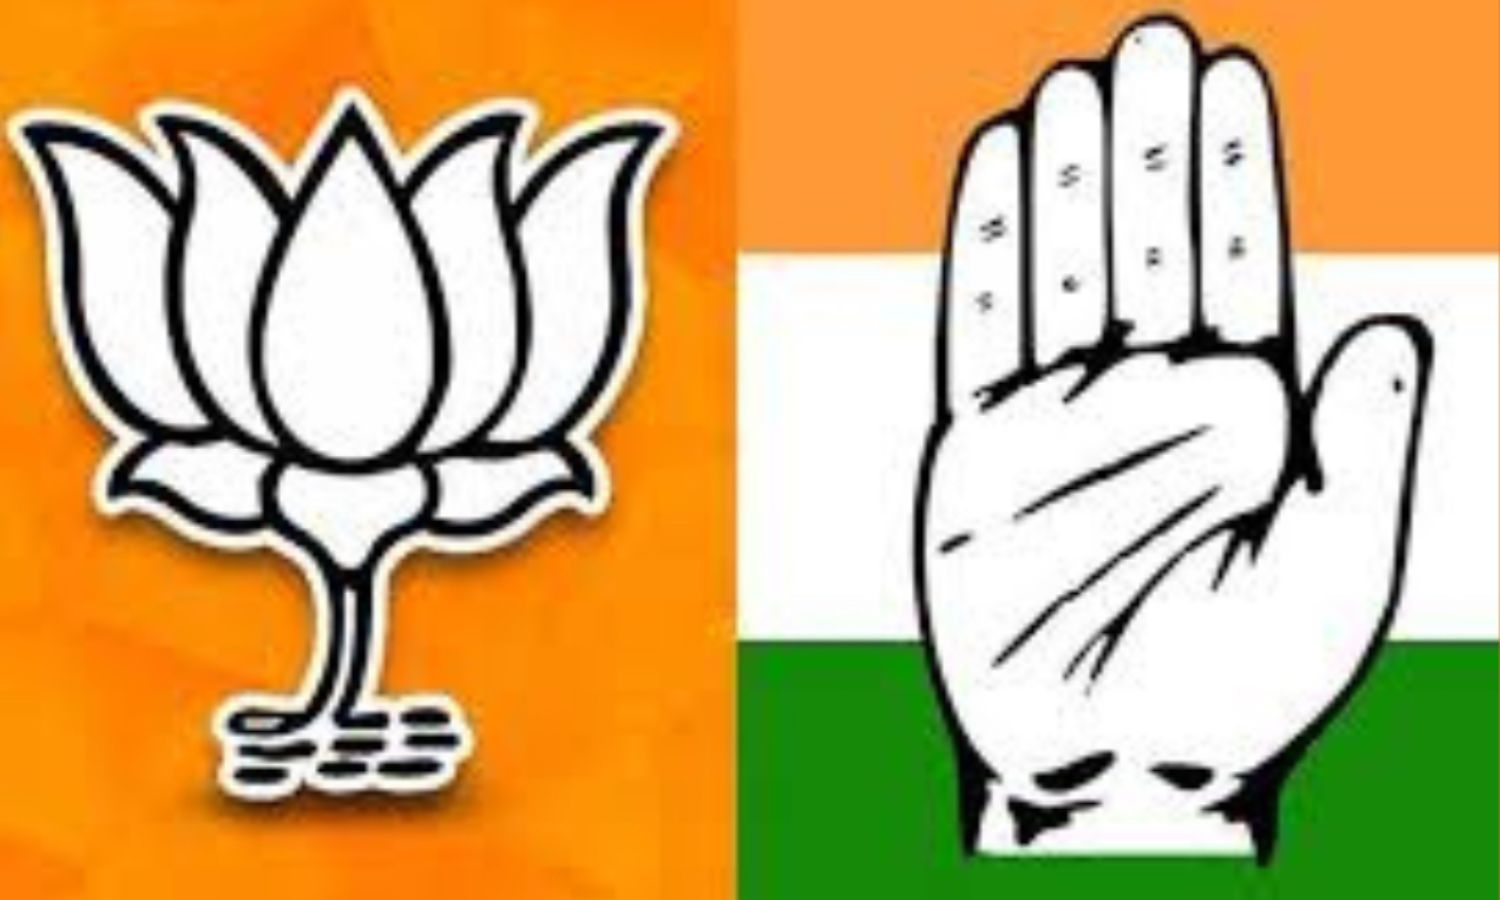 Congress And Bjp Leads With Top Vote Shares In Telangana